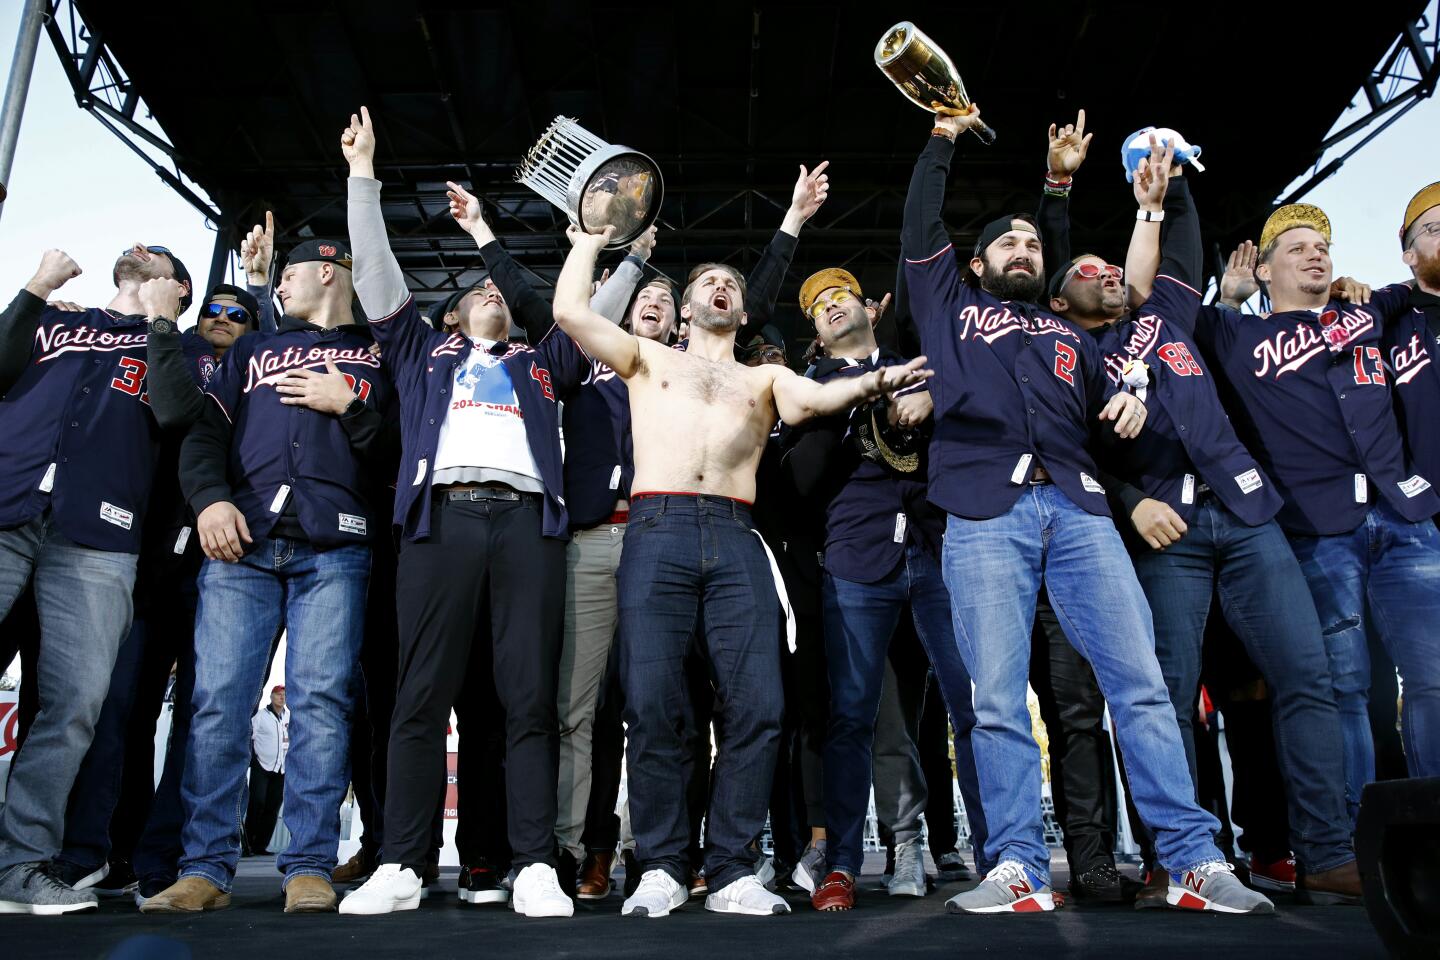 Washington Nationals second baseman Brian Dozier, center, holds up the World Series trophy as he celebrates with teammates at a rally after a parade to celebrate the team's World Series baseball championship over the Houston Astros, Saturday, Nov. 2, 2019, in Washington. (AP Photo/Patrick Semansky)